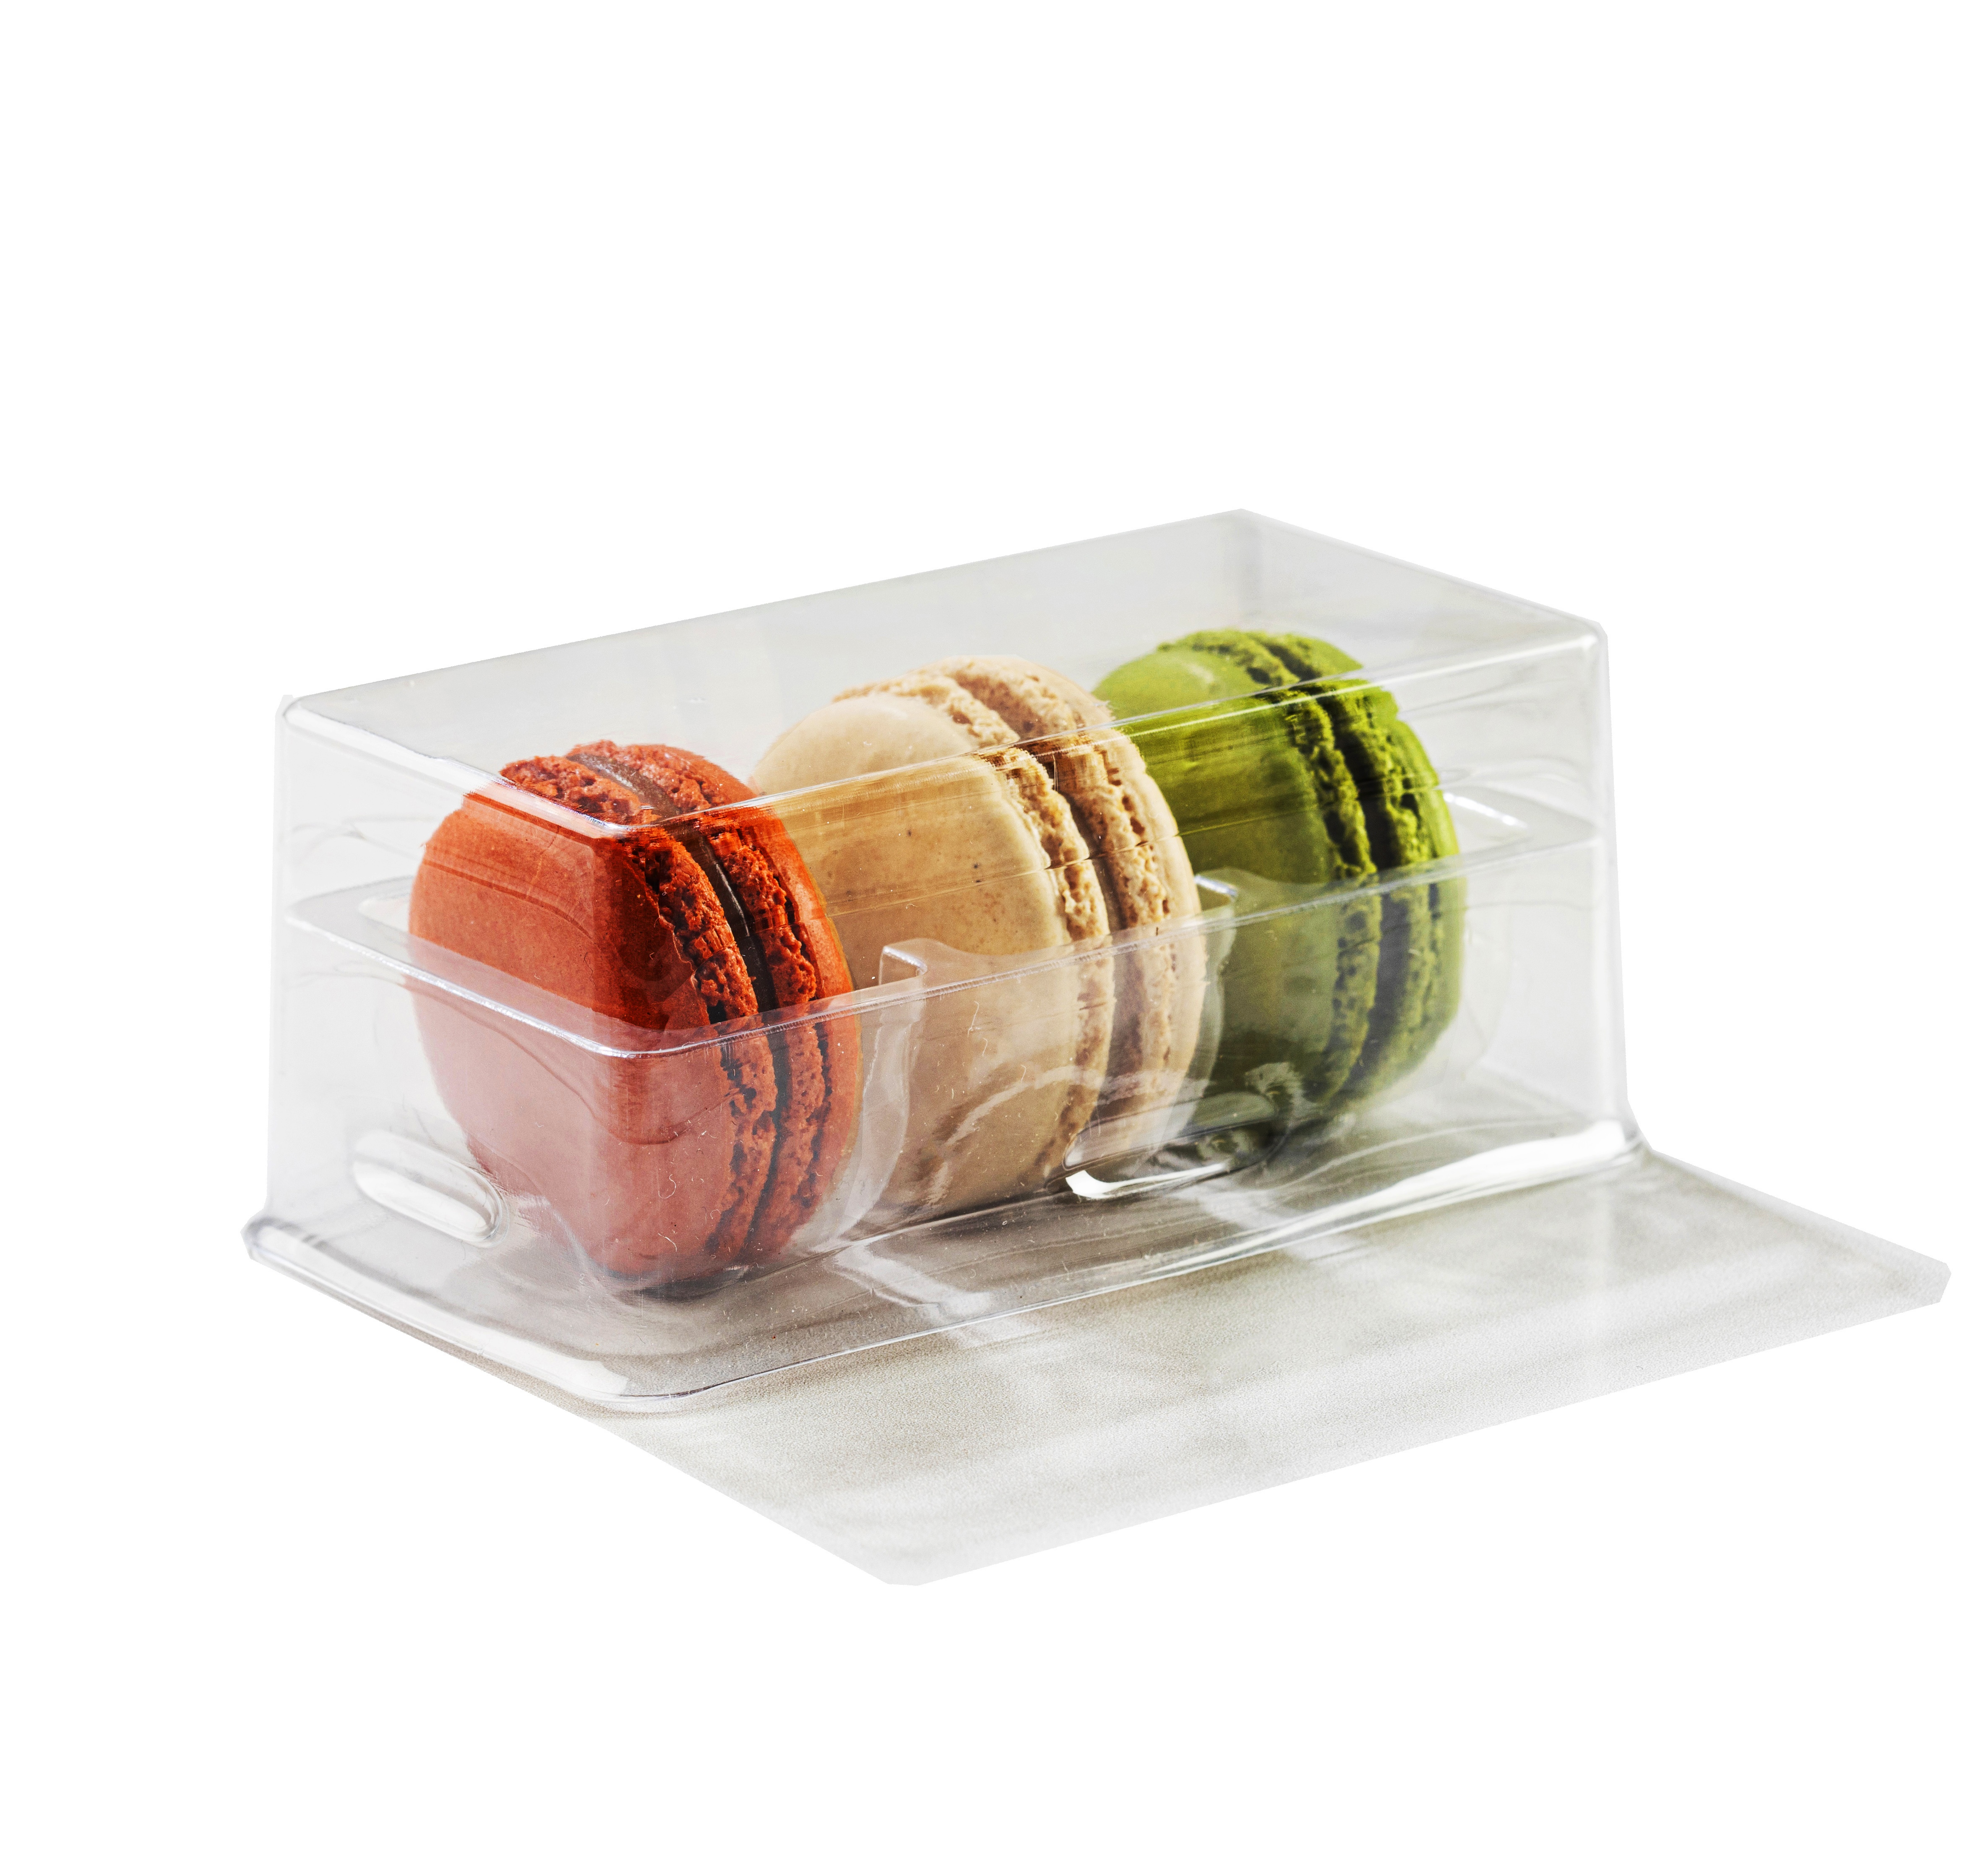 https://www.pastrychefsboutique.com/25606/pastry-chefs-boutique-dcm3cl-clear-plastic-macarons-storage-and-gift-boxes-clear-base-3-macarons-pack-of-60-macarons-packaging.jpg